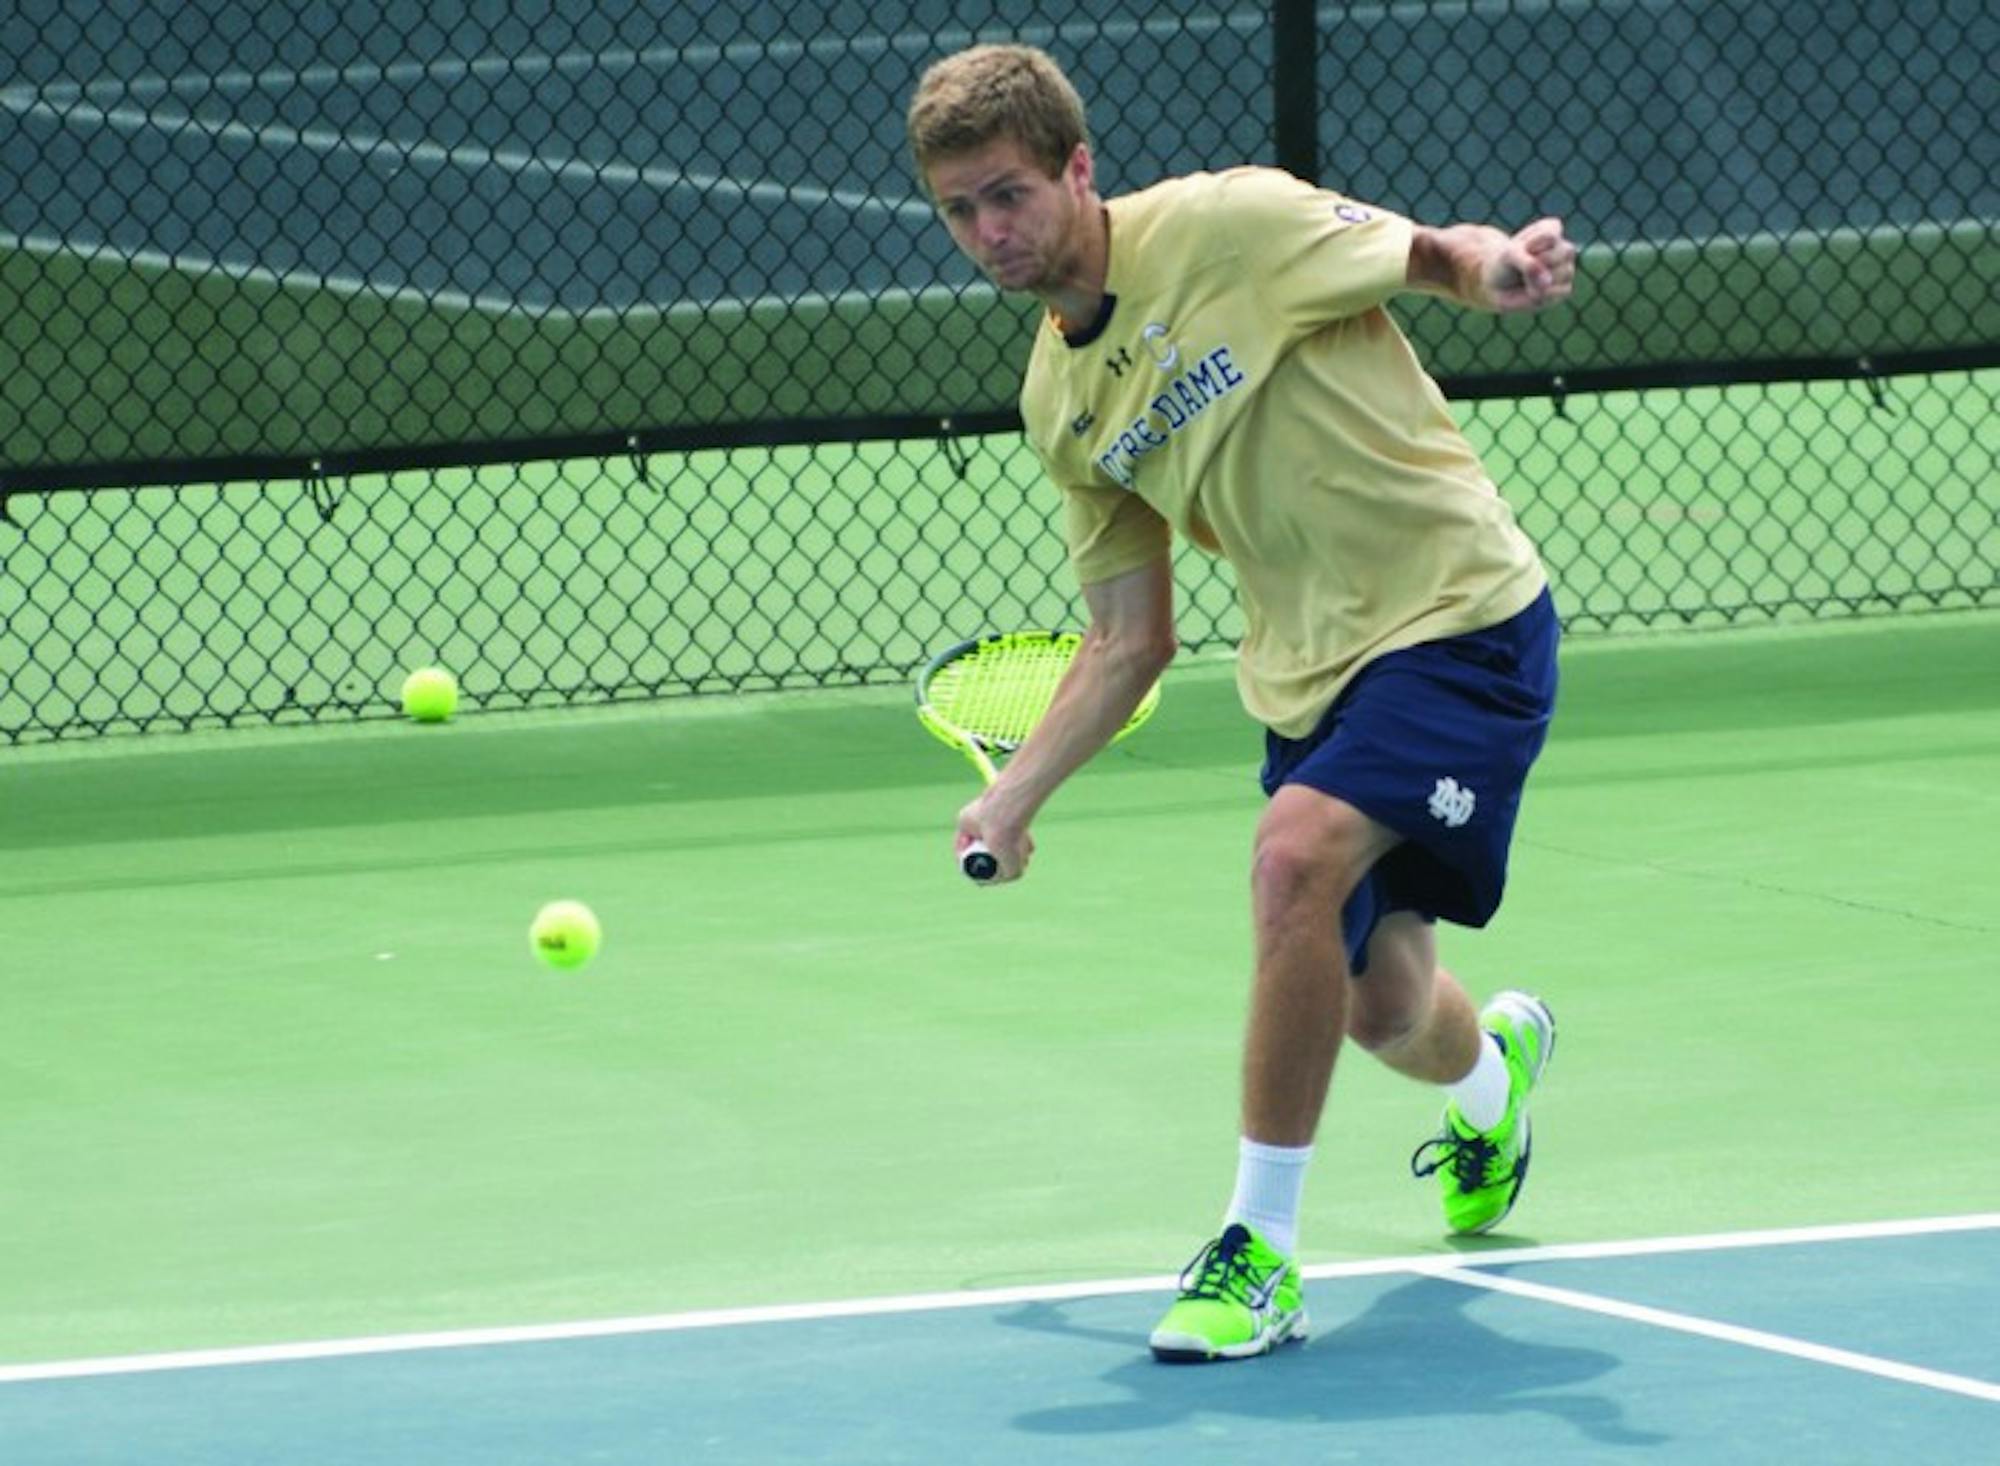 Irish senior Quentin Monaghan goes down after a forehand shot during Notre Dame’s 4-3 win over North Carolina State on April 18 at Courtney Tennis Center.